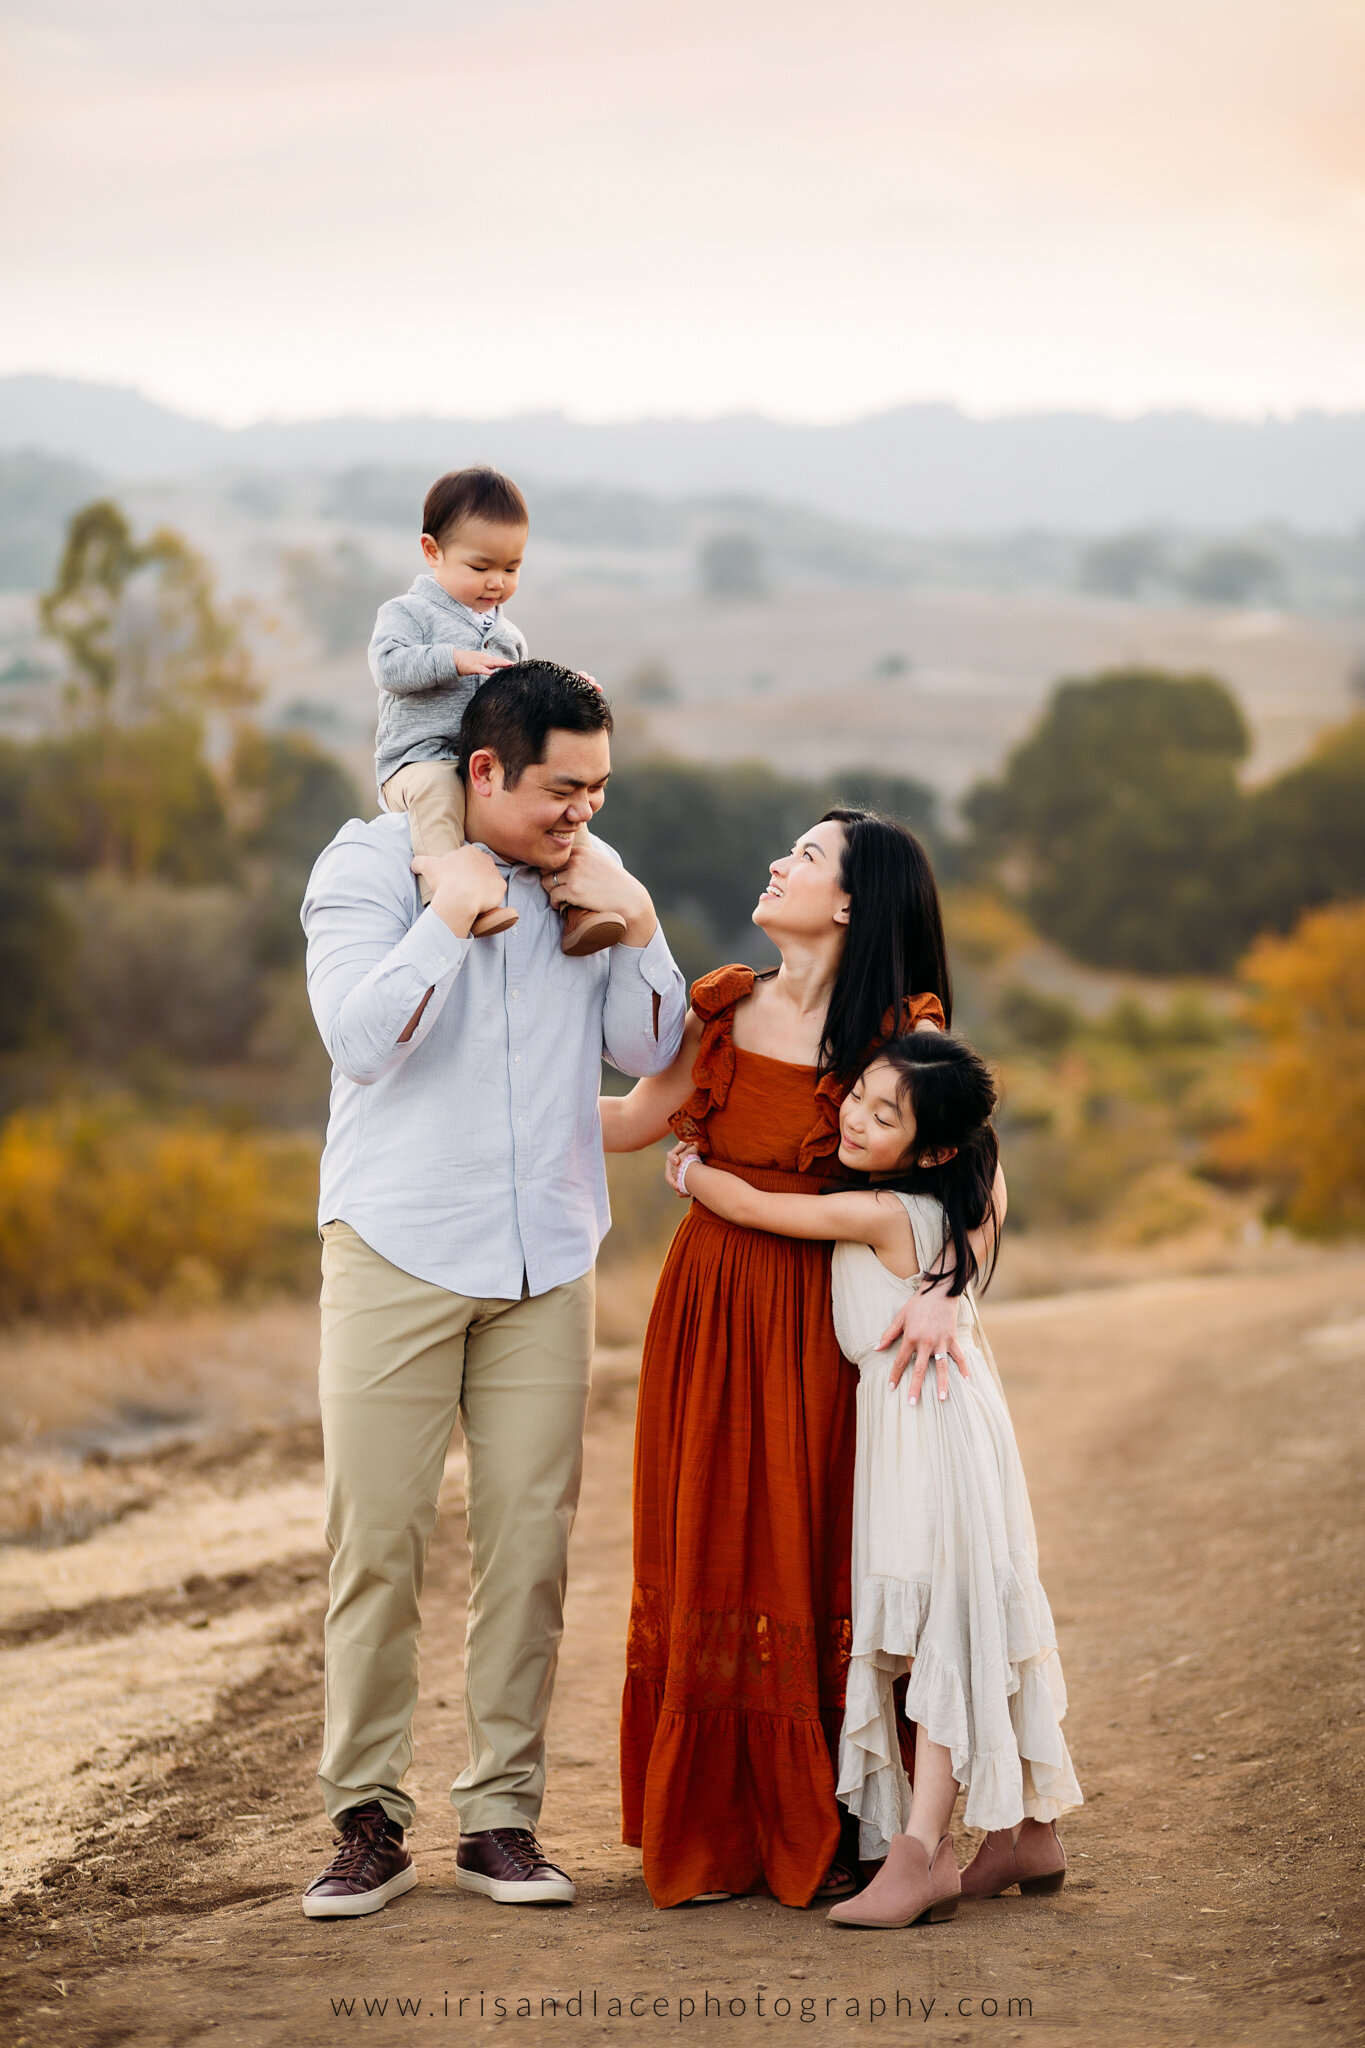 San Francisco Bay Area Family Photography   |   Shot in SF Peninsula by Iris and Lace Photography